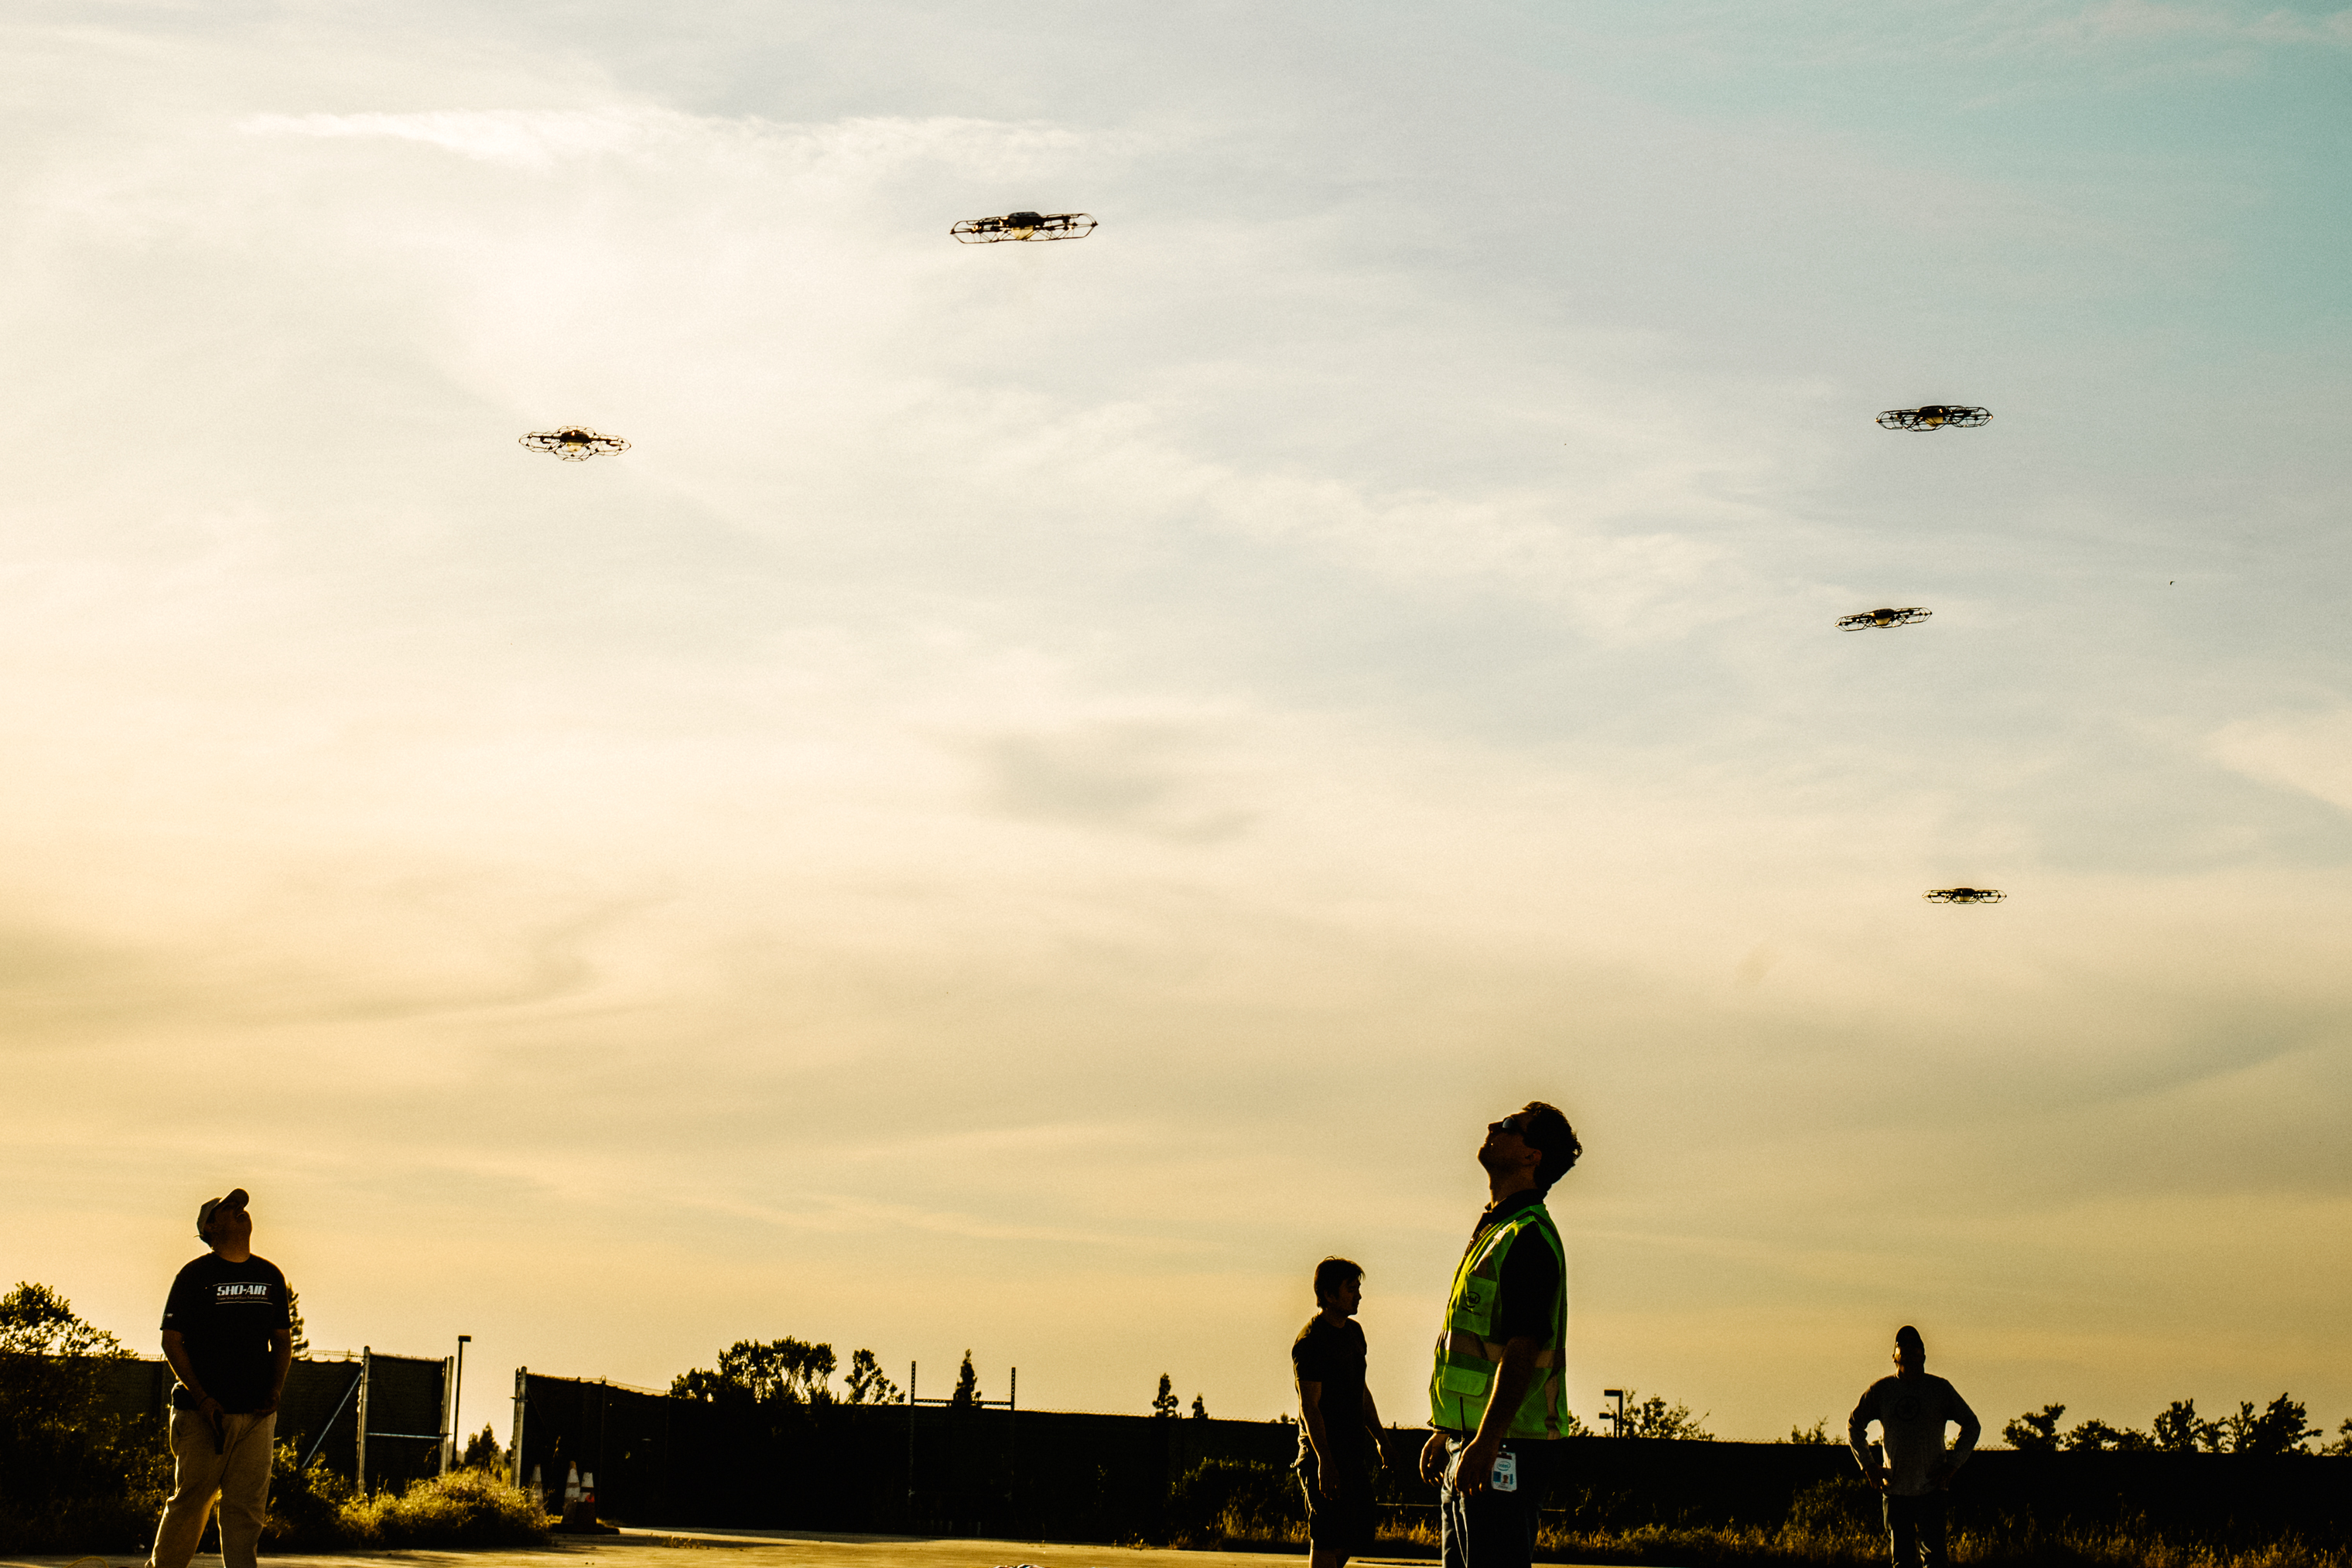 Members of the Intel Shooting Star team test a few of their drones before a cover animation attempt on May 3, 2018 in Folsom, Calif. (Jake Stangel for TIME)